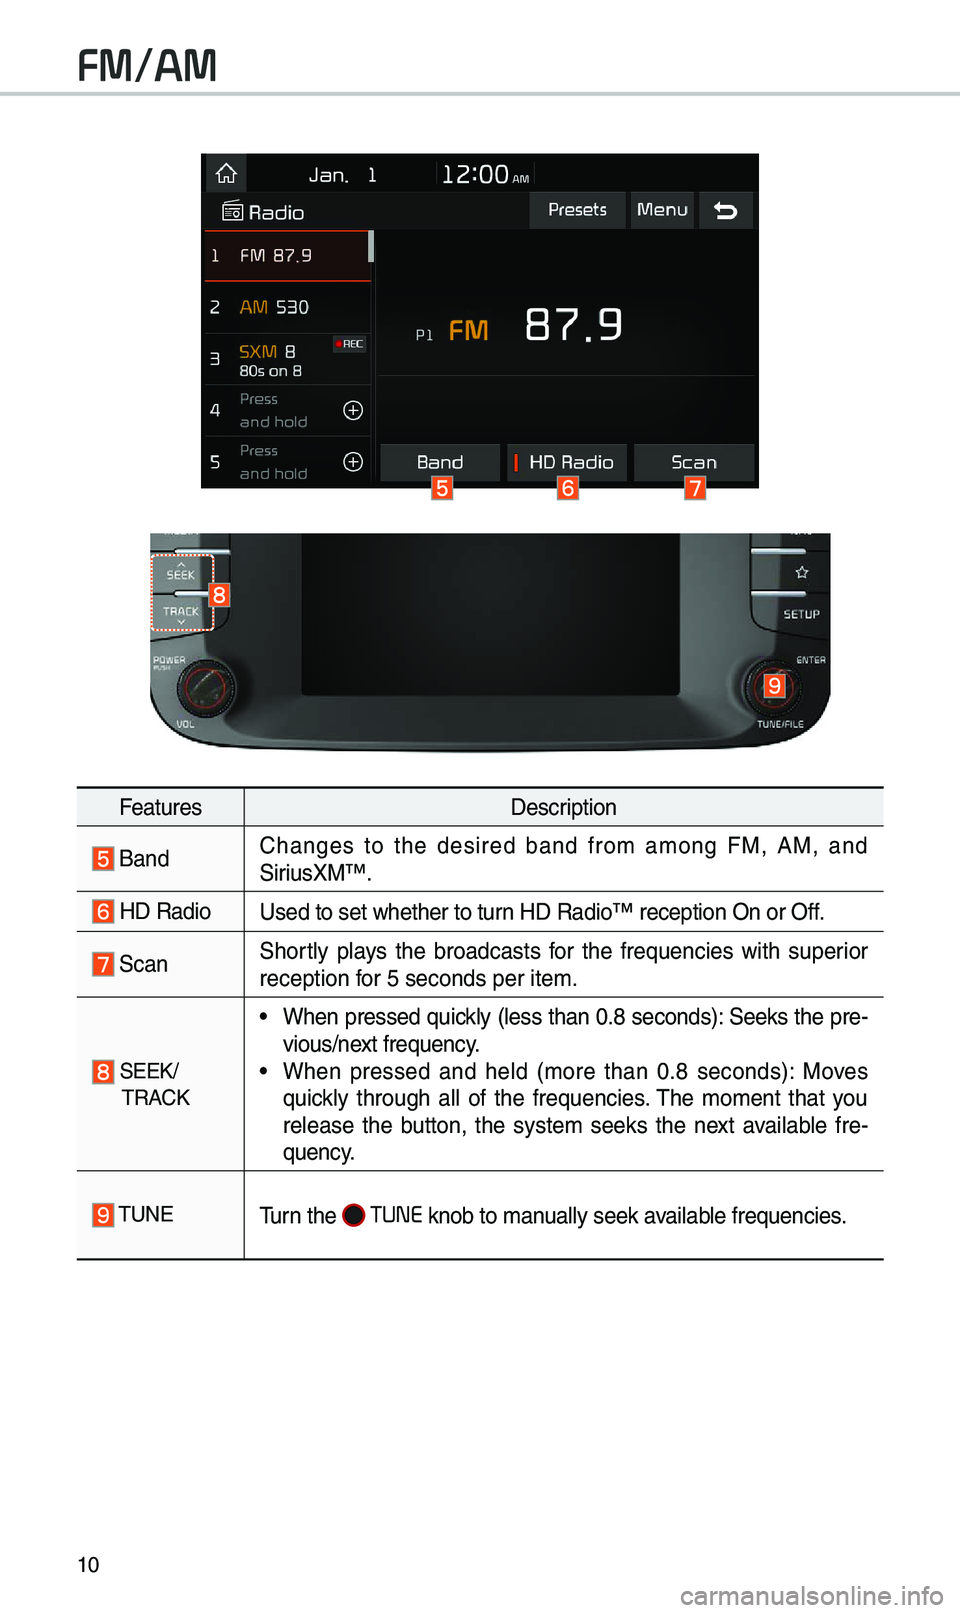 KIA SOUL 2019  Navigation System Quick Reference Guide 10
FeaturesDescription
 BandChanges  to  the  desired  band  fro\f  a\fong  FM,  AM,  and 
SiriusXM™.
 HD Radio Used to set whether \uto turn HD Radio™ recept\uion On or Off.
 ScanShort\by  p\bays